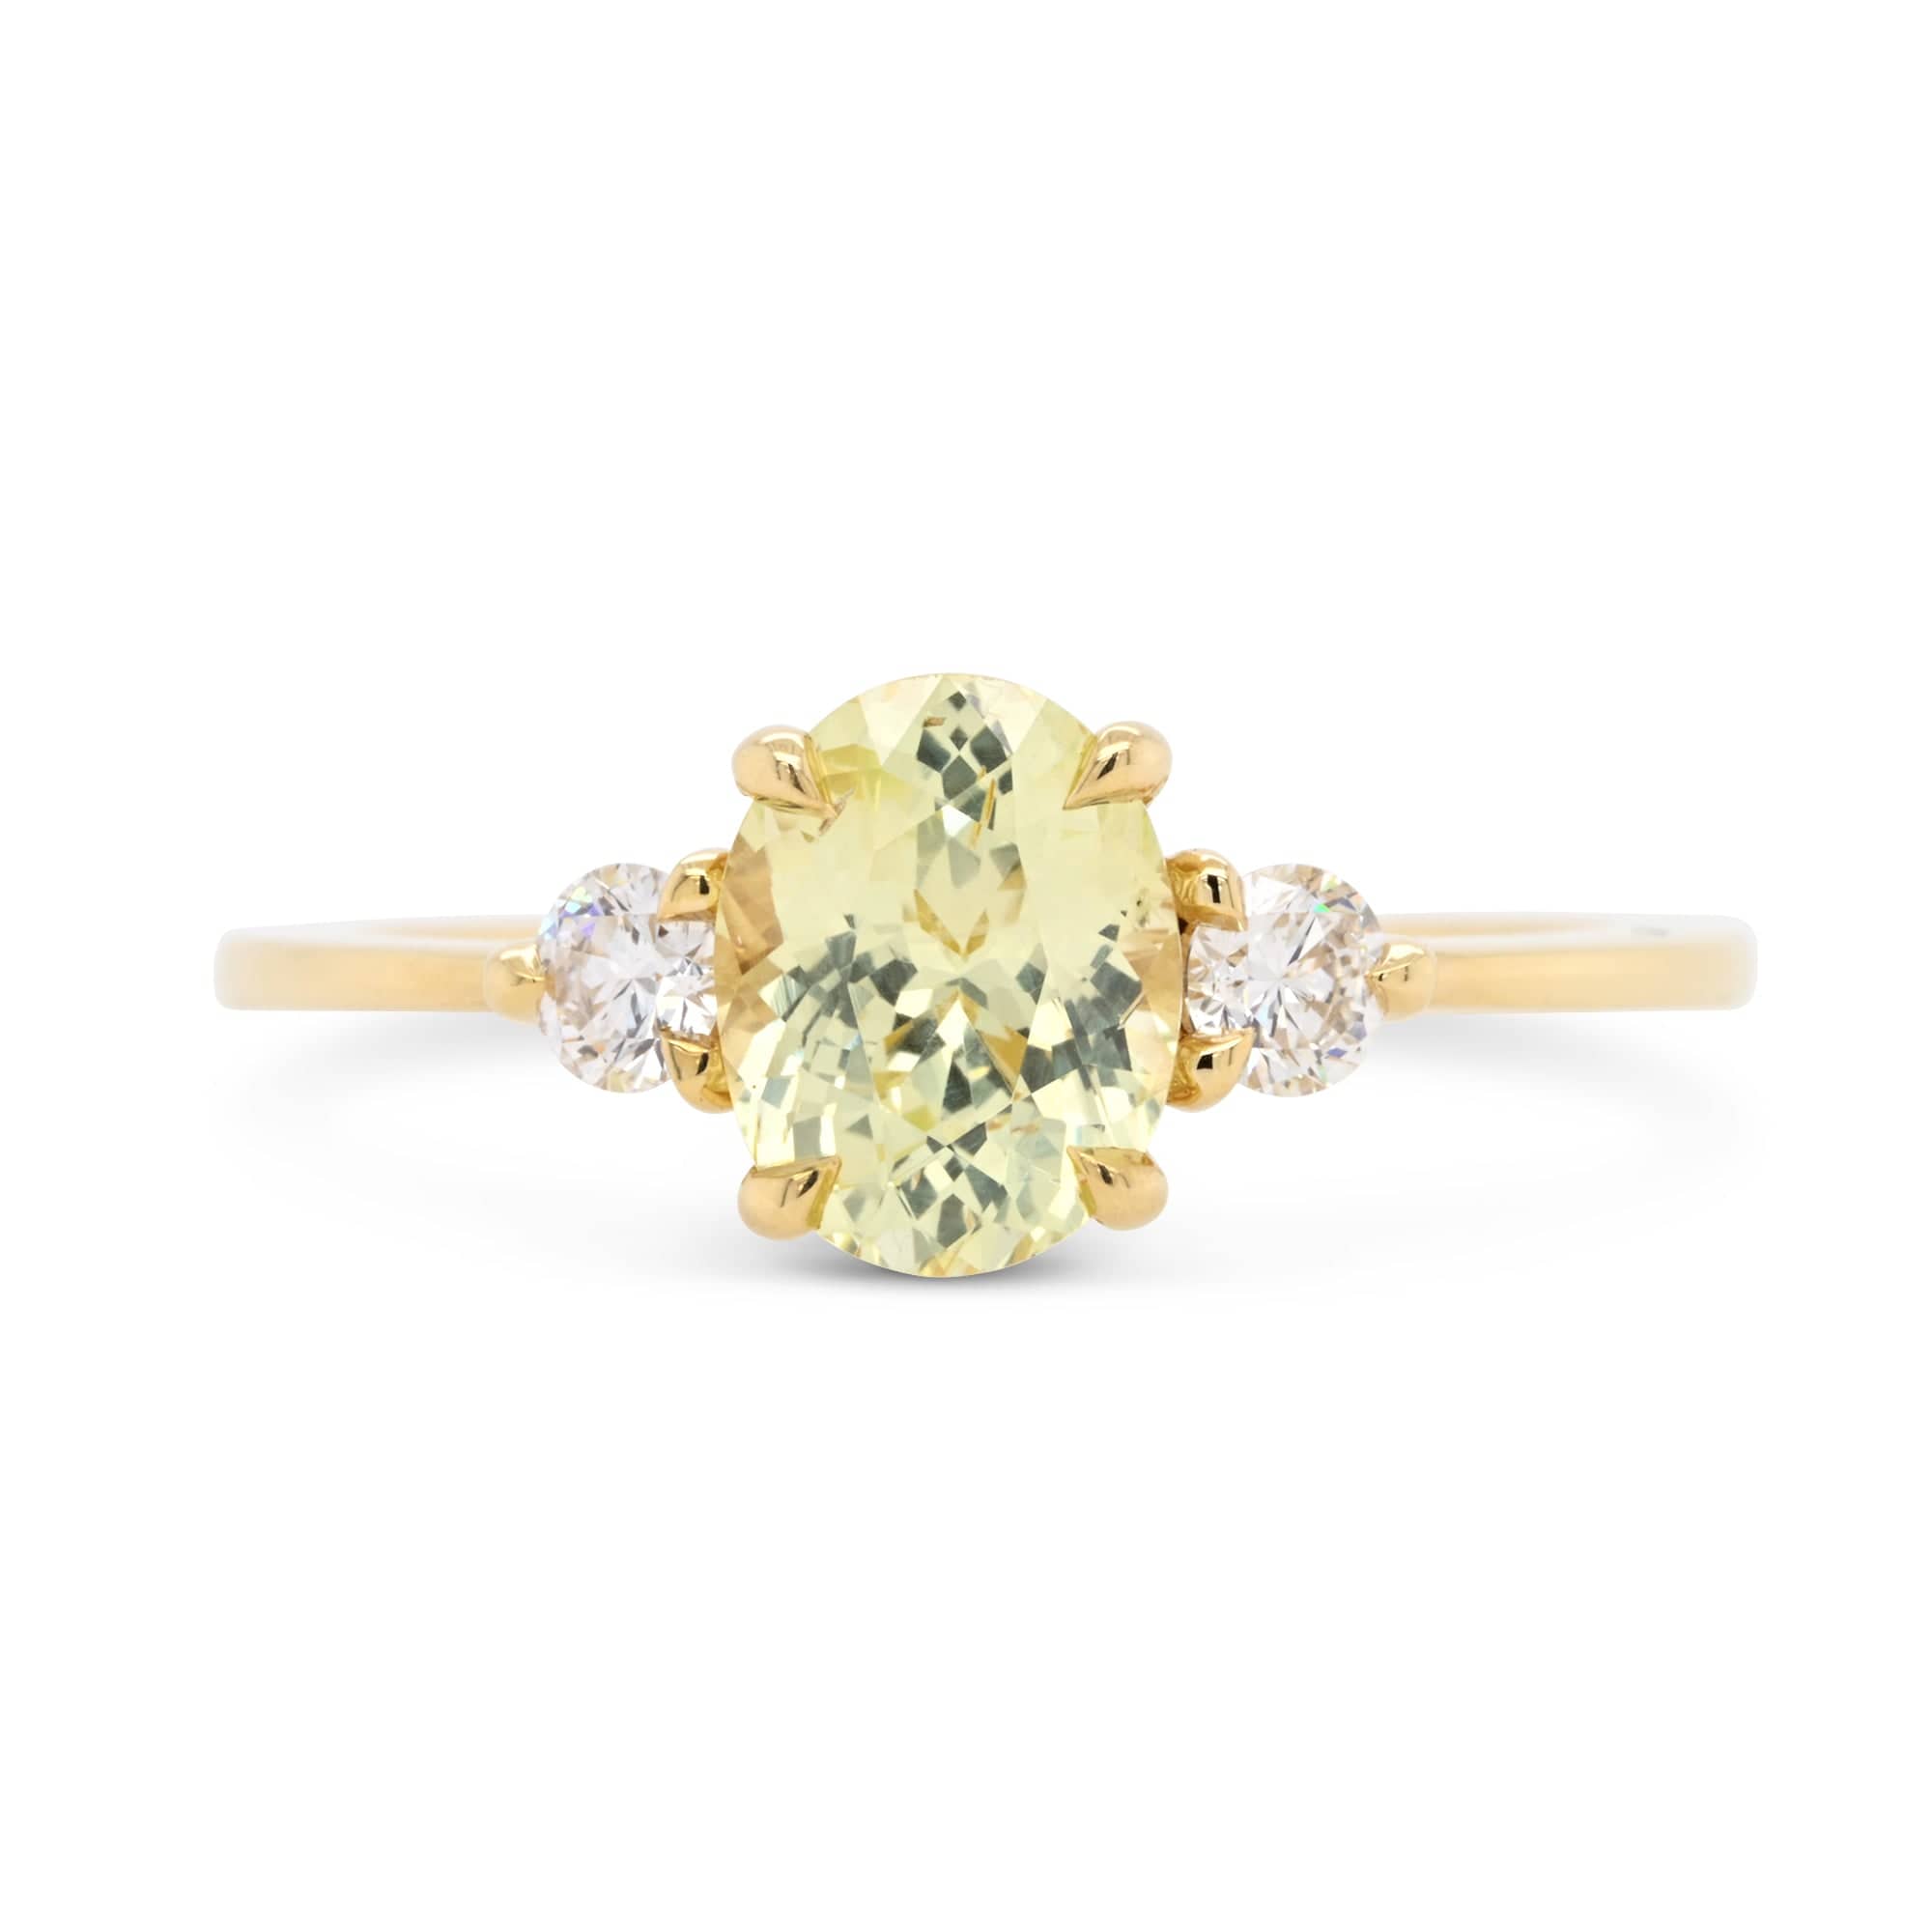 14k yellow gold engagement ring with yellow oval-cut sapphire and diamonds